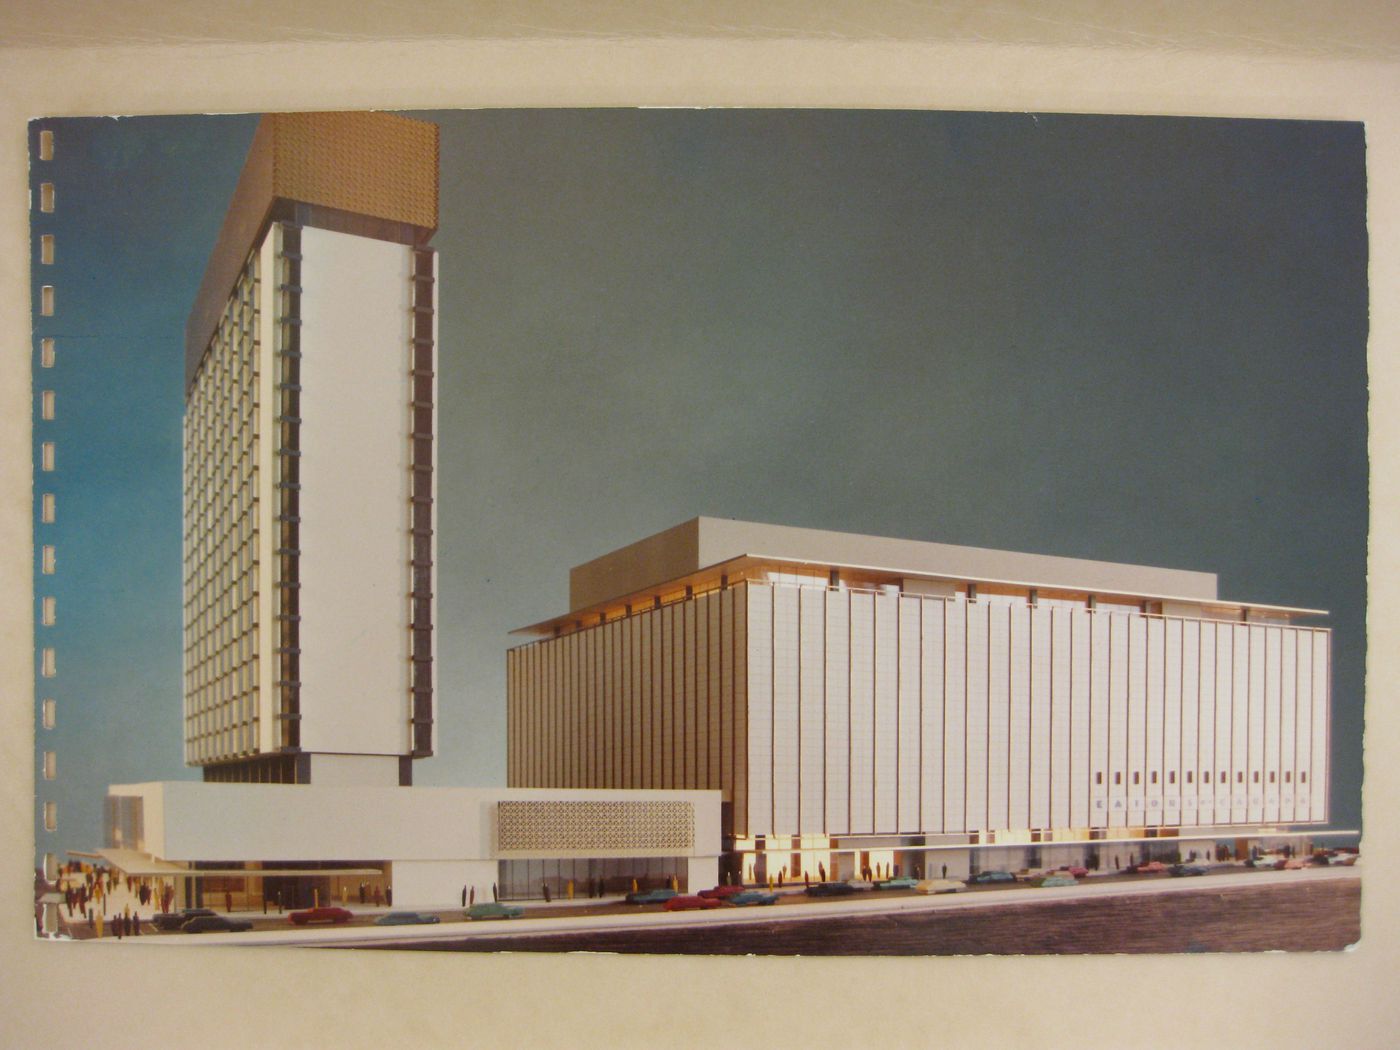 View of a model for the Eaton's Department Store and Office Tower